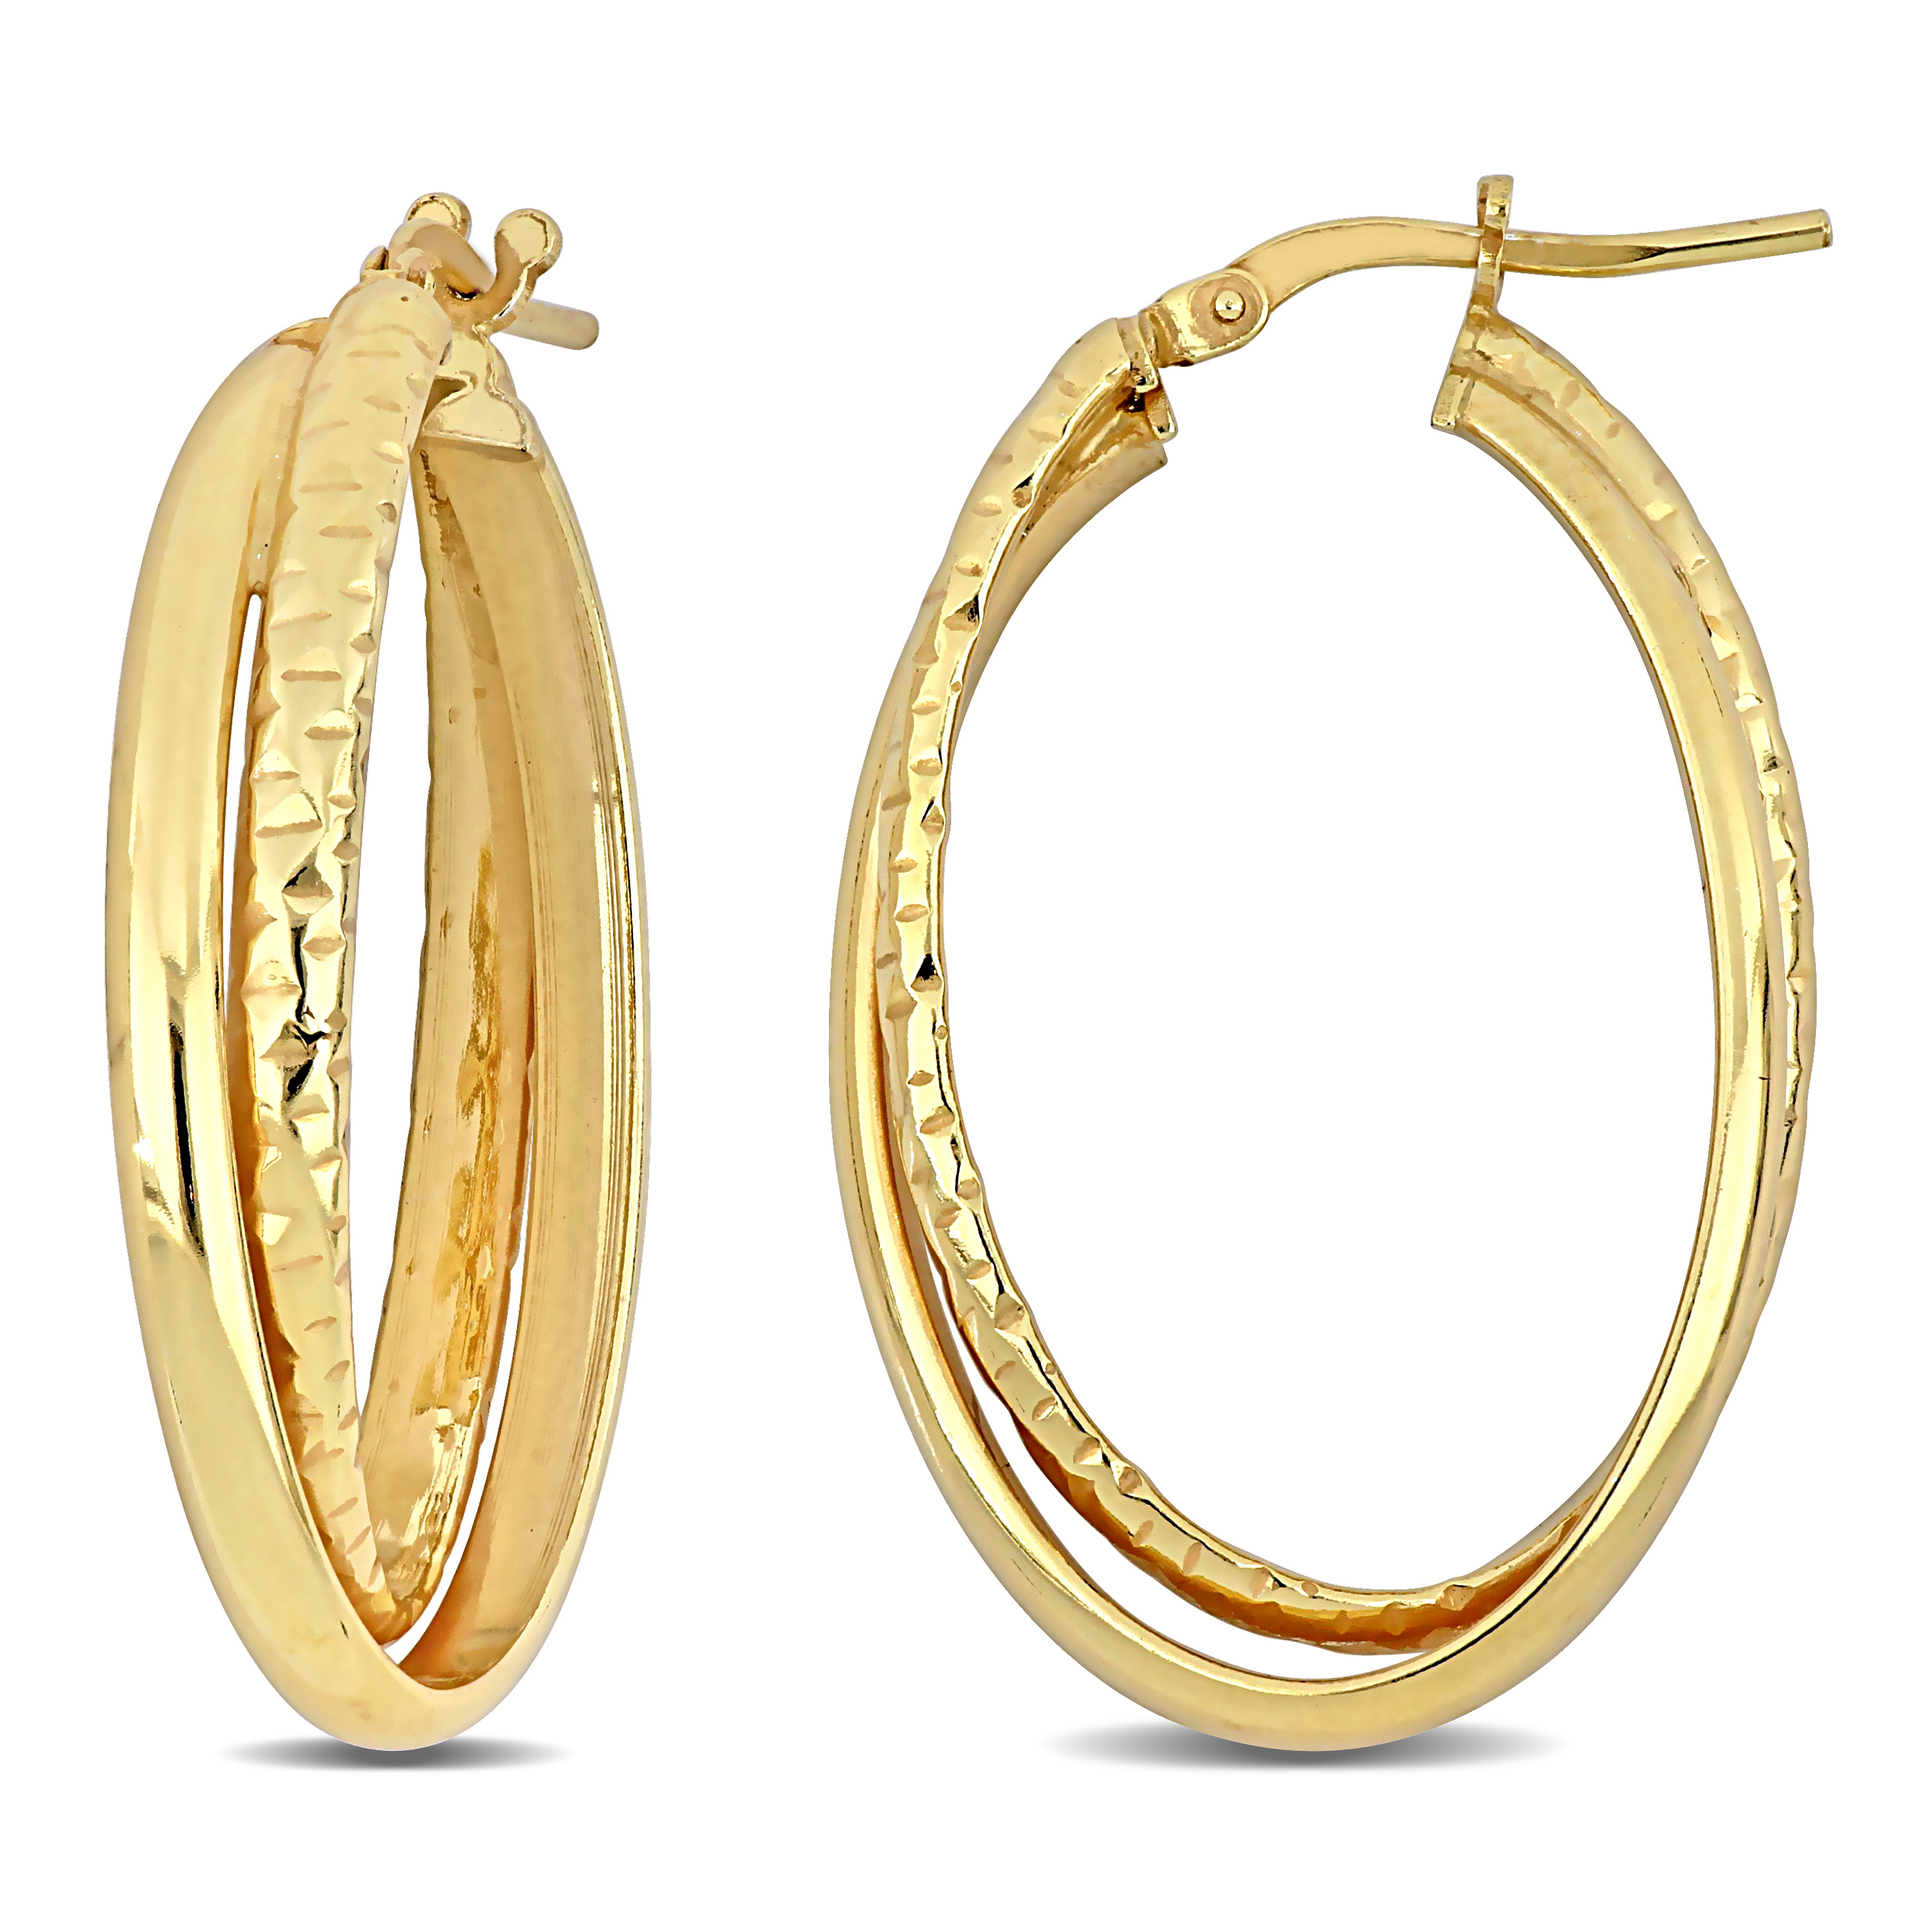 35 MM Entwined Hoop Earrings in Yellow Plated Sterling Silver